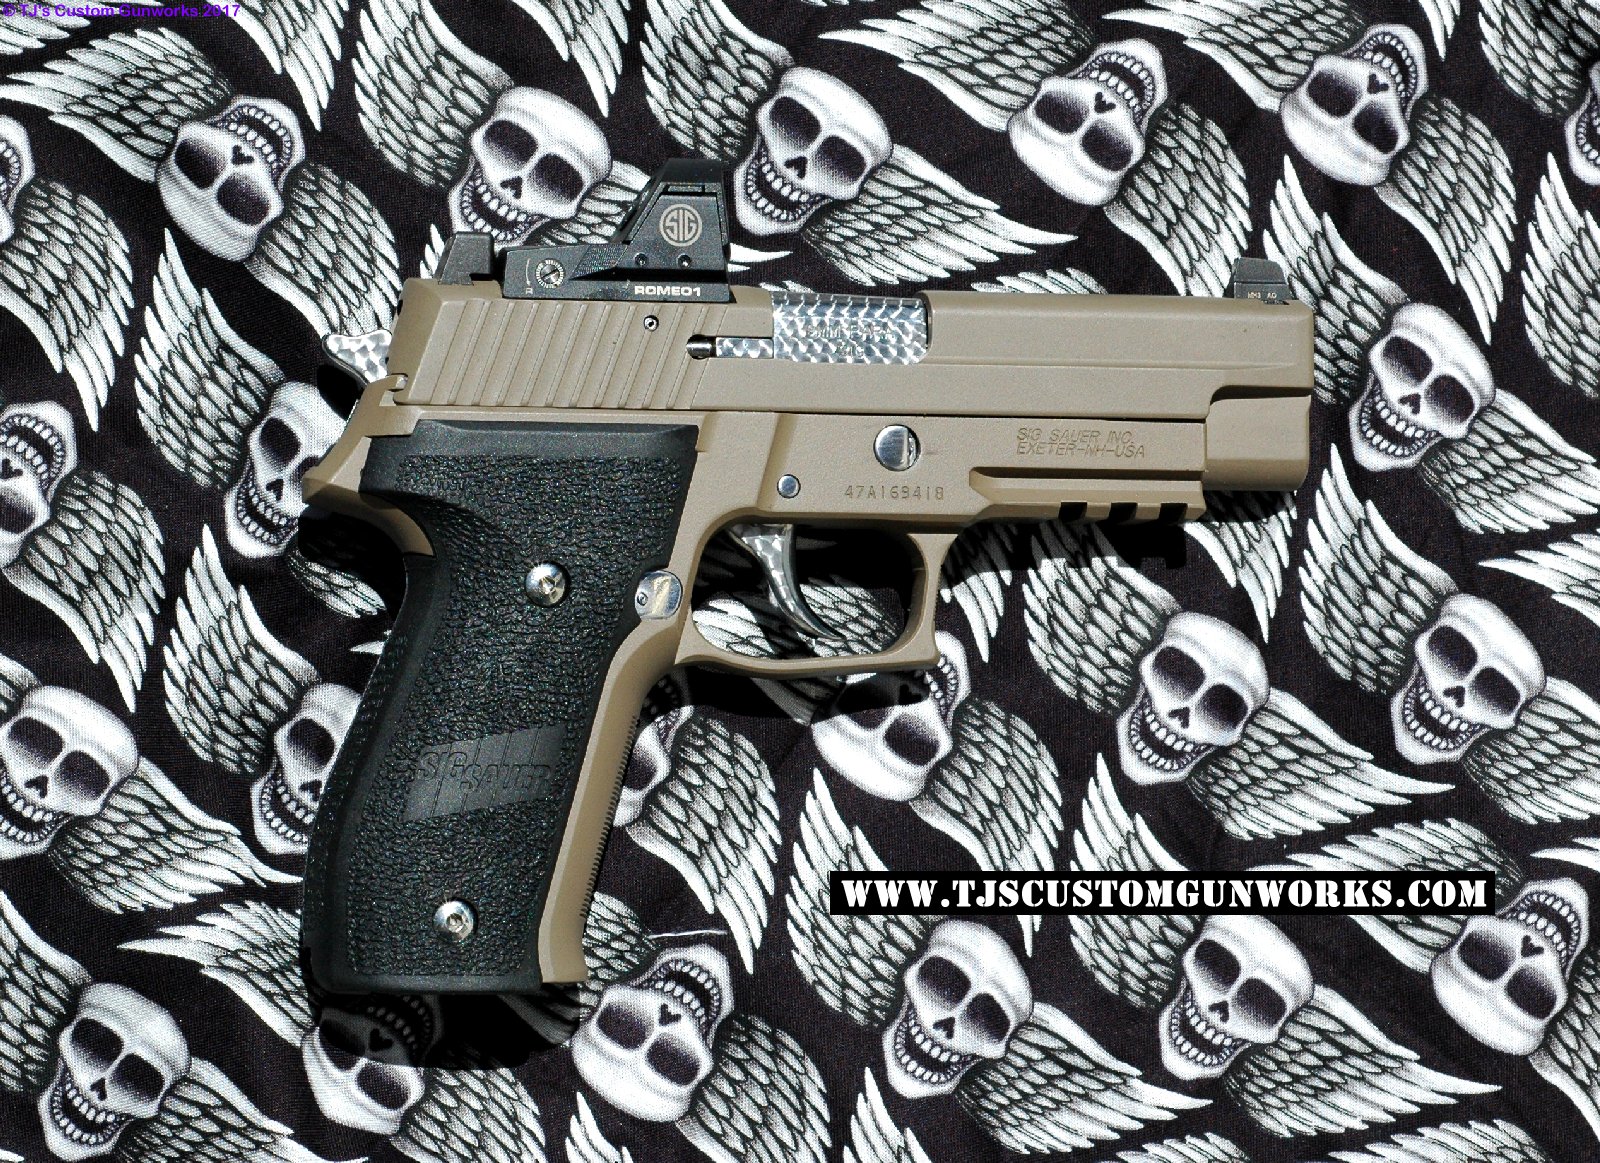 Tan Sig Sauer SigArms P226-MK25 with Romeo1 Red Dot Scope